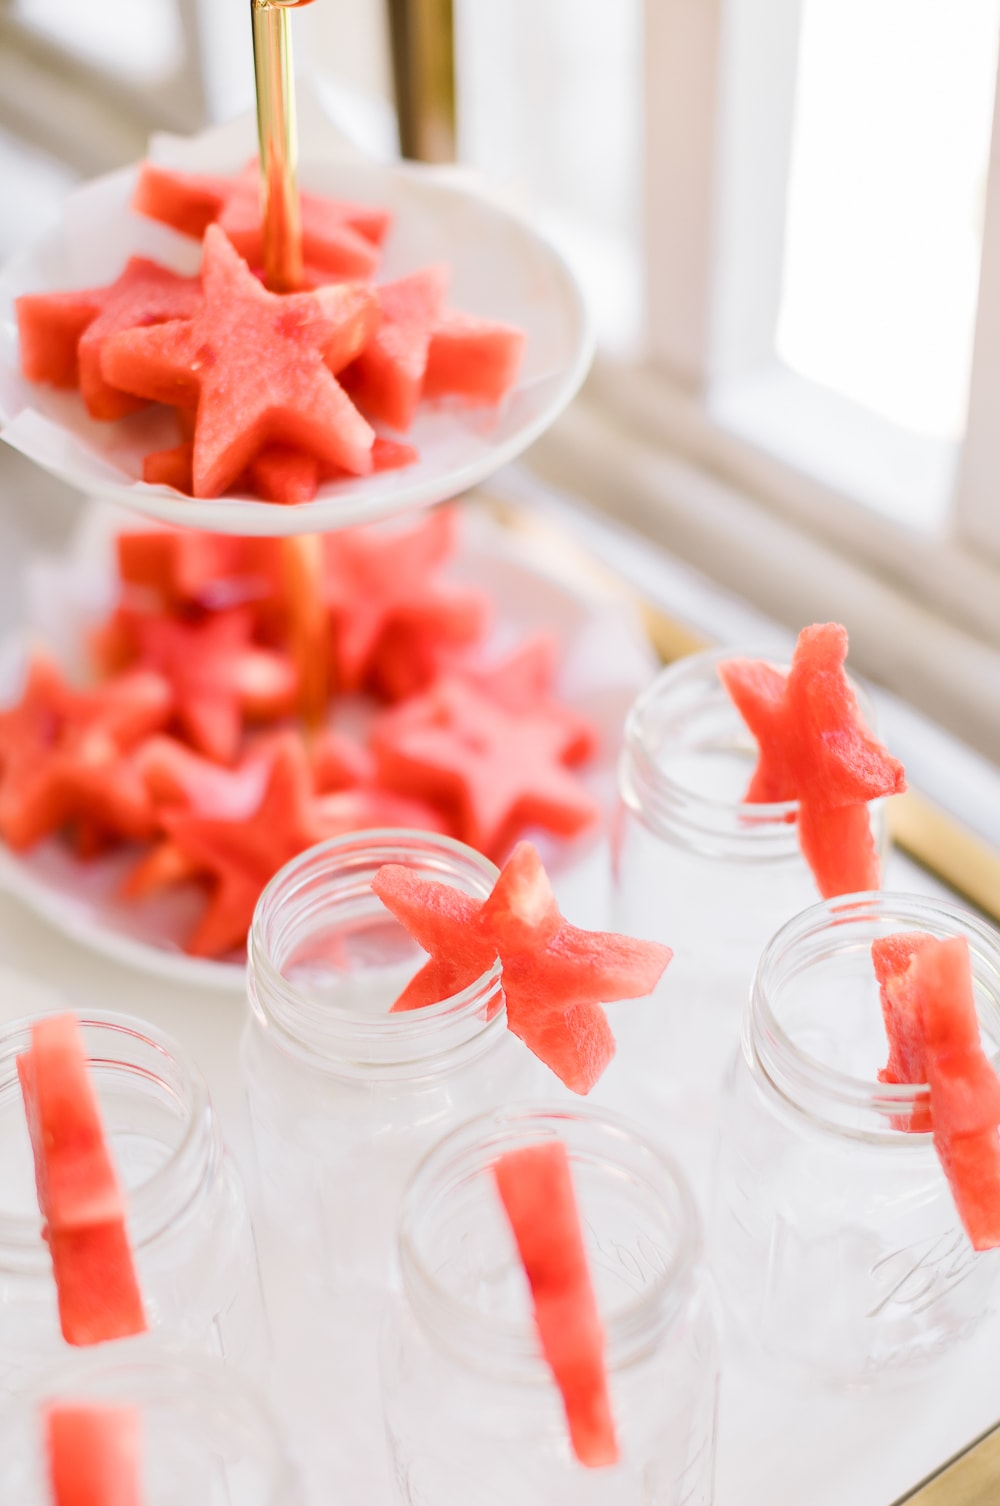 Star shaped watermelon garnishes made by blogger Stephanie Ziajka on Diary of a Debutante